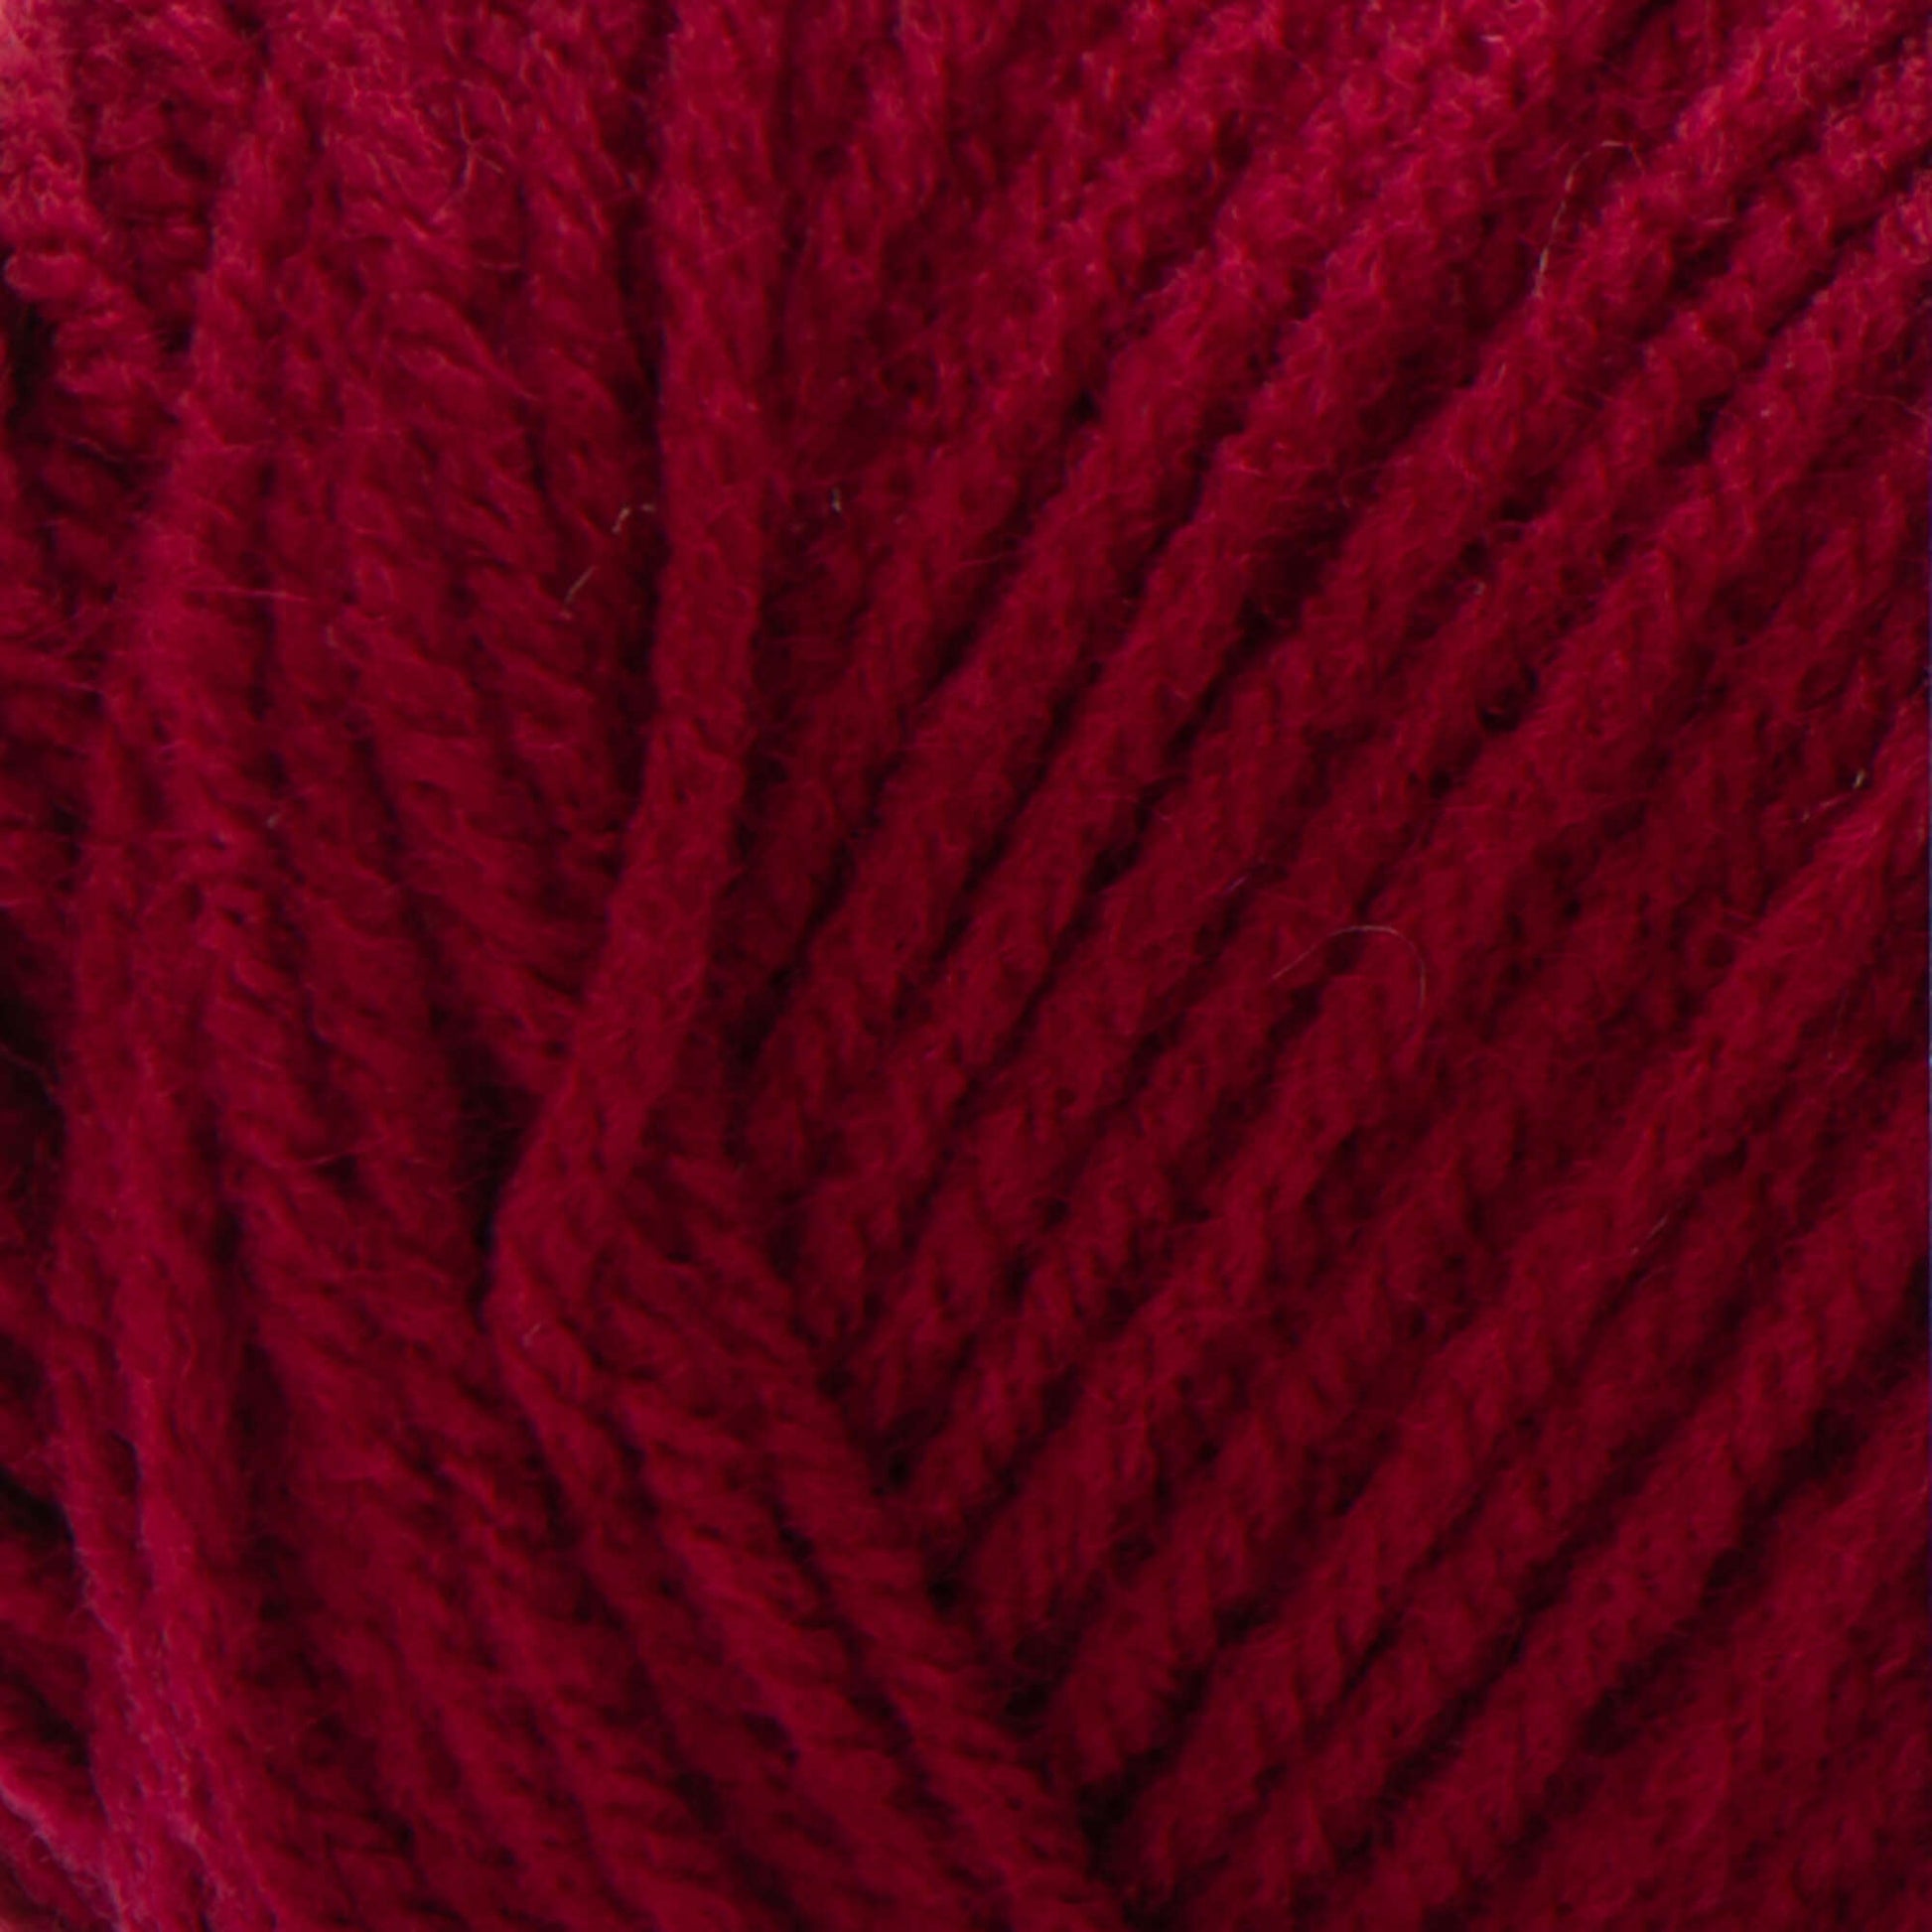 Red Heart Classic Yarn - Clearance shades